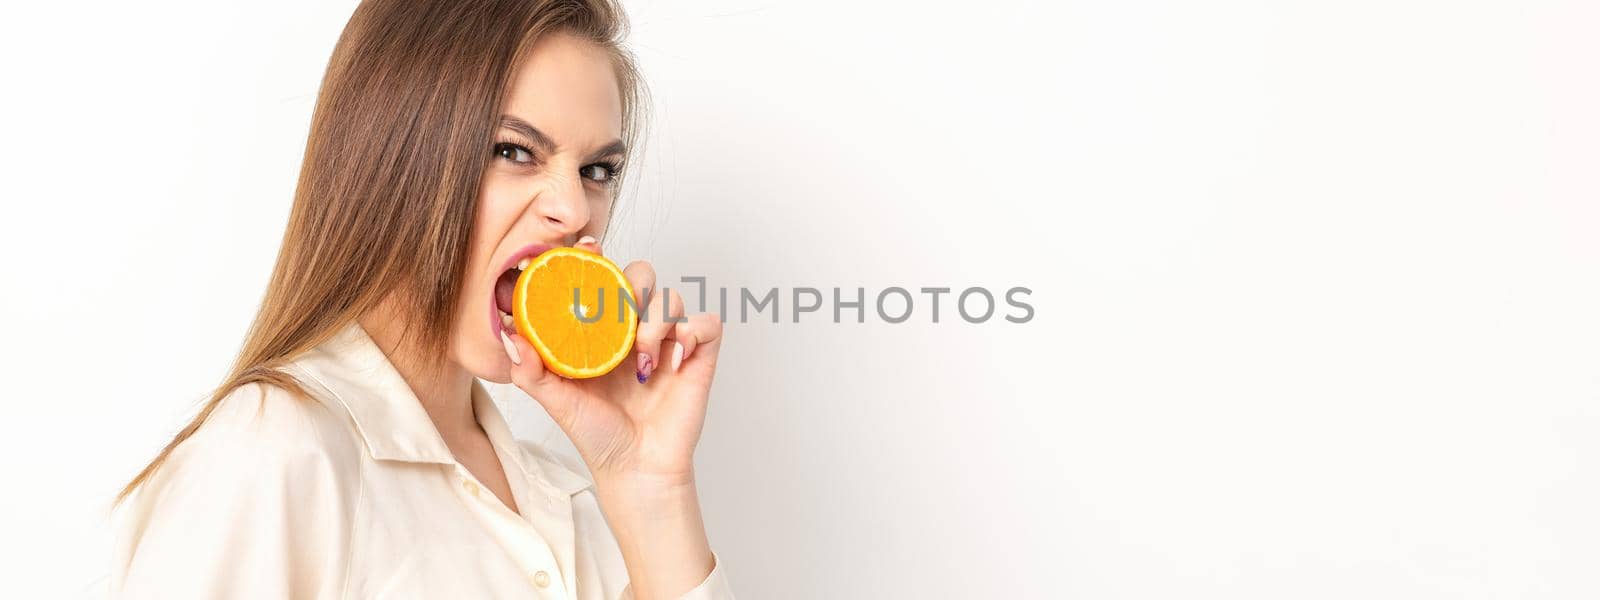 Young caucasian pretty cunning brunette woman biting one orange half and looking at the camera wearing a white shirt over white background